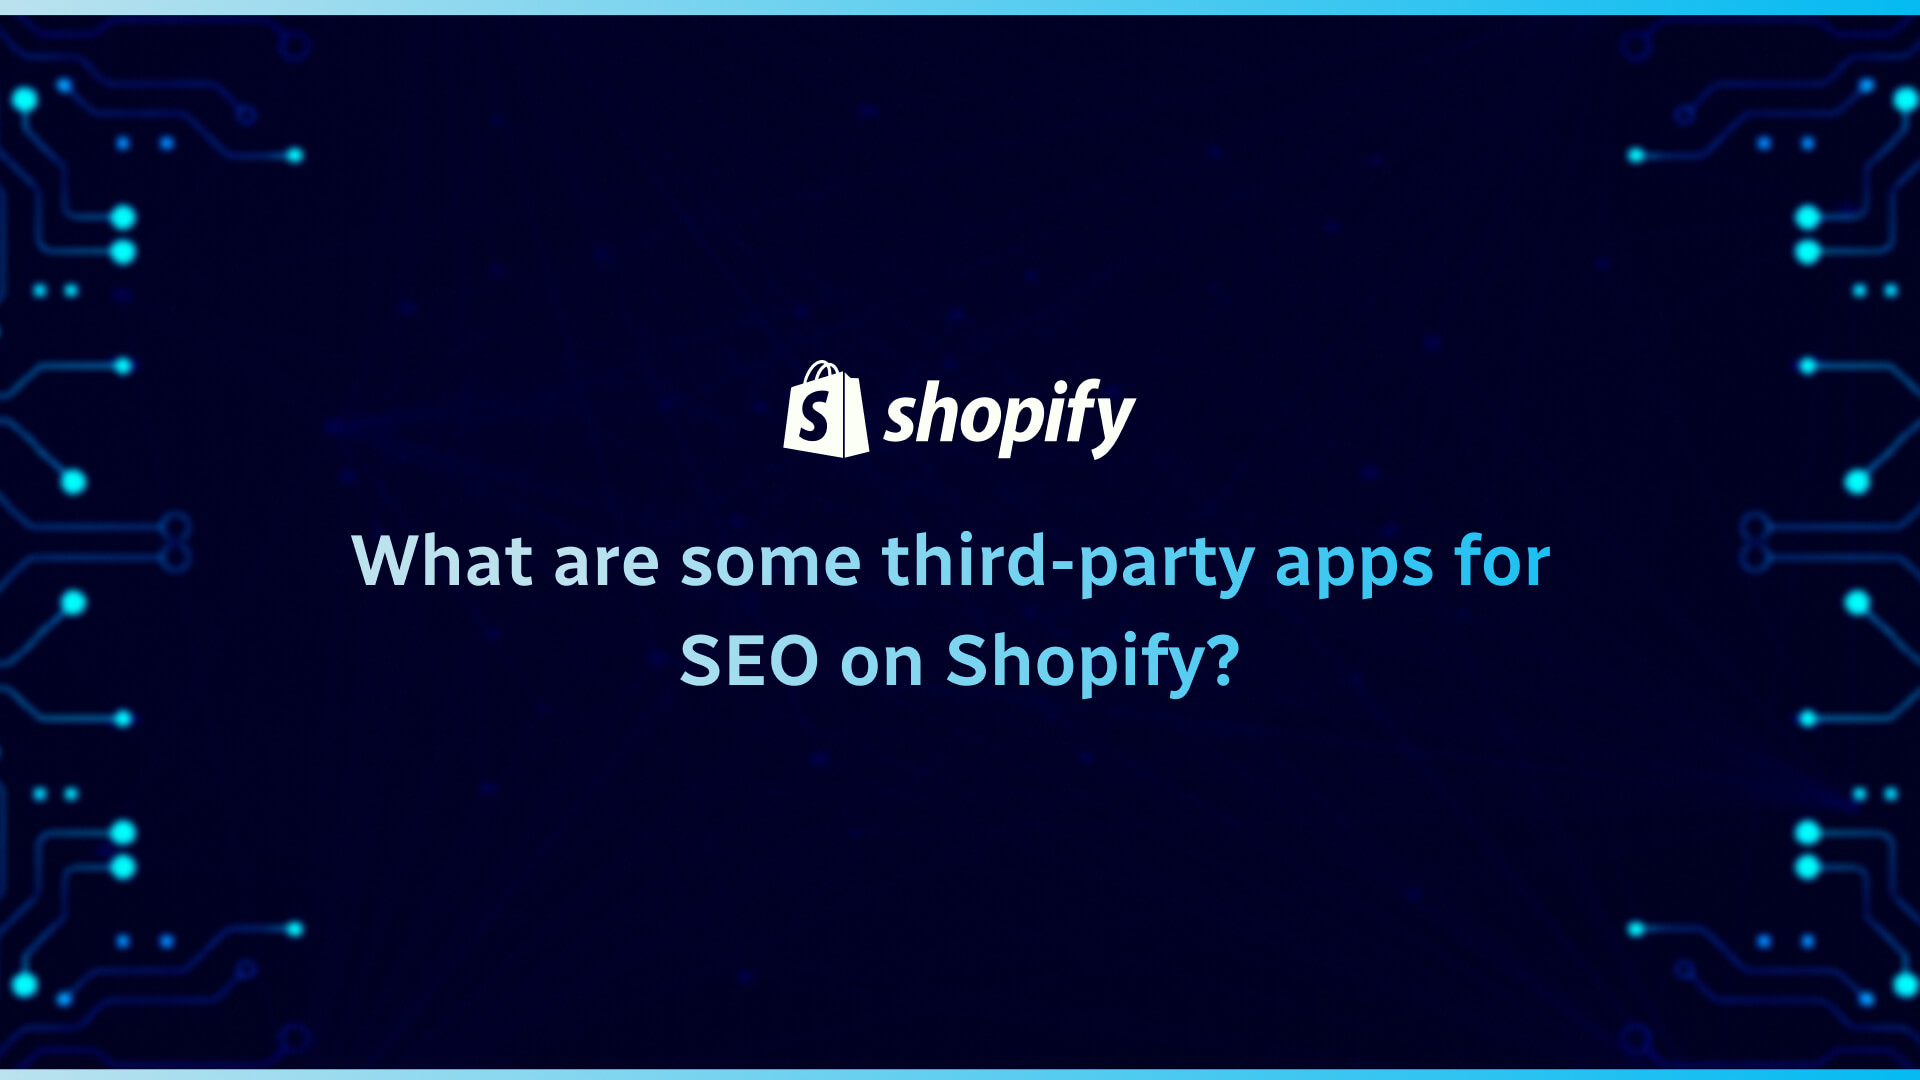 What are some third-party apps for SEO on Shopify?